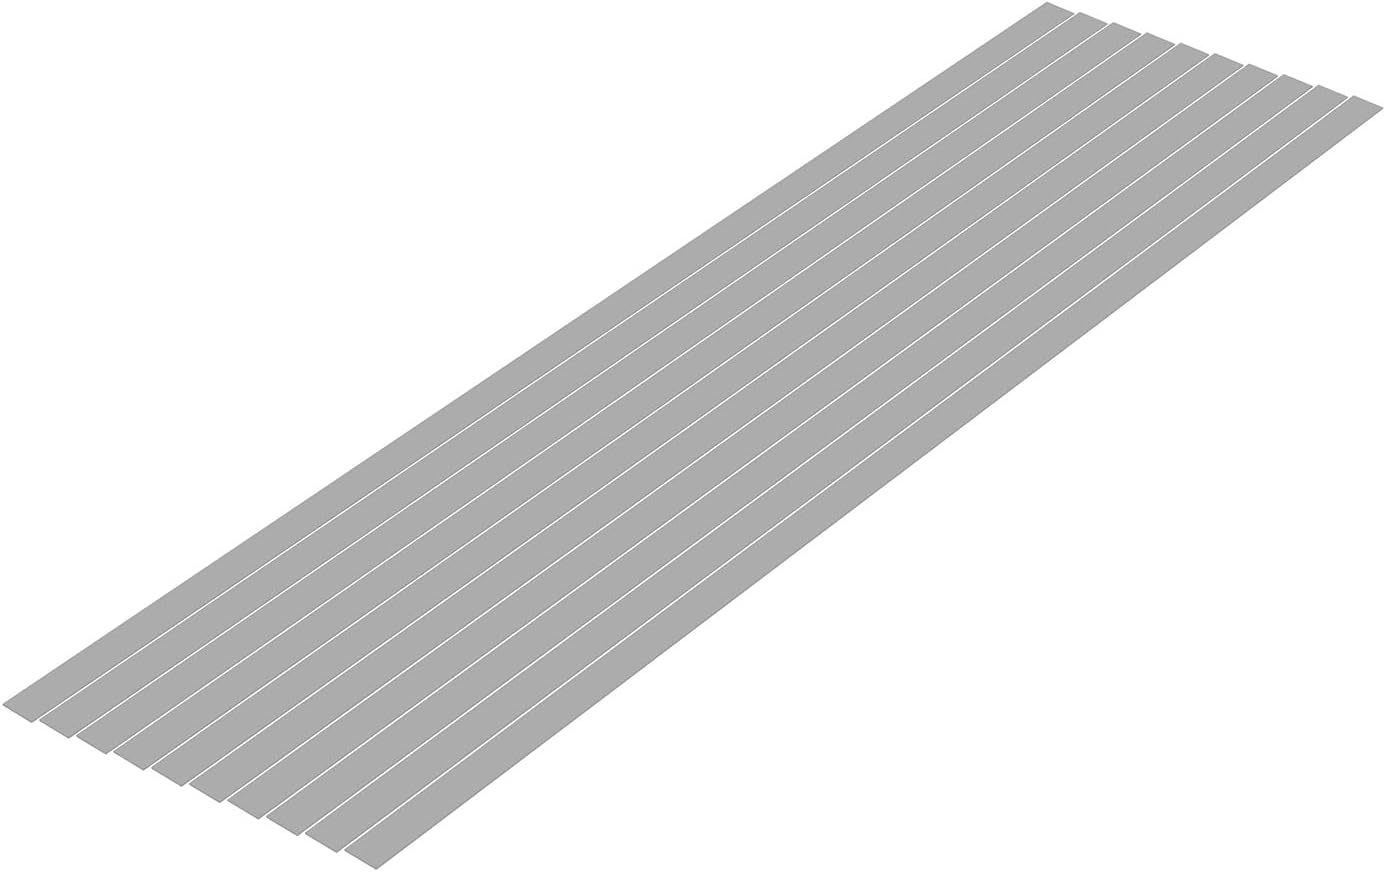 Wave OM-476 Material Series Plastic Material Gray Shredded Board 0.02 x 0.24 inches (0.5 x 6.0 mm), 10 Pieces - BanzaiHobby